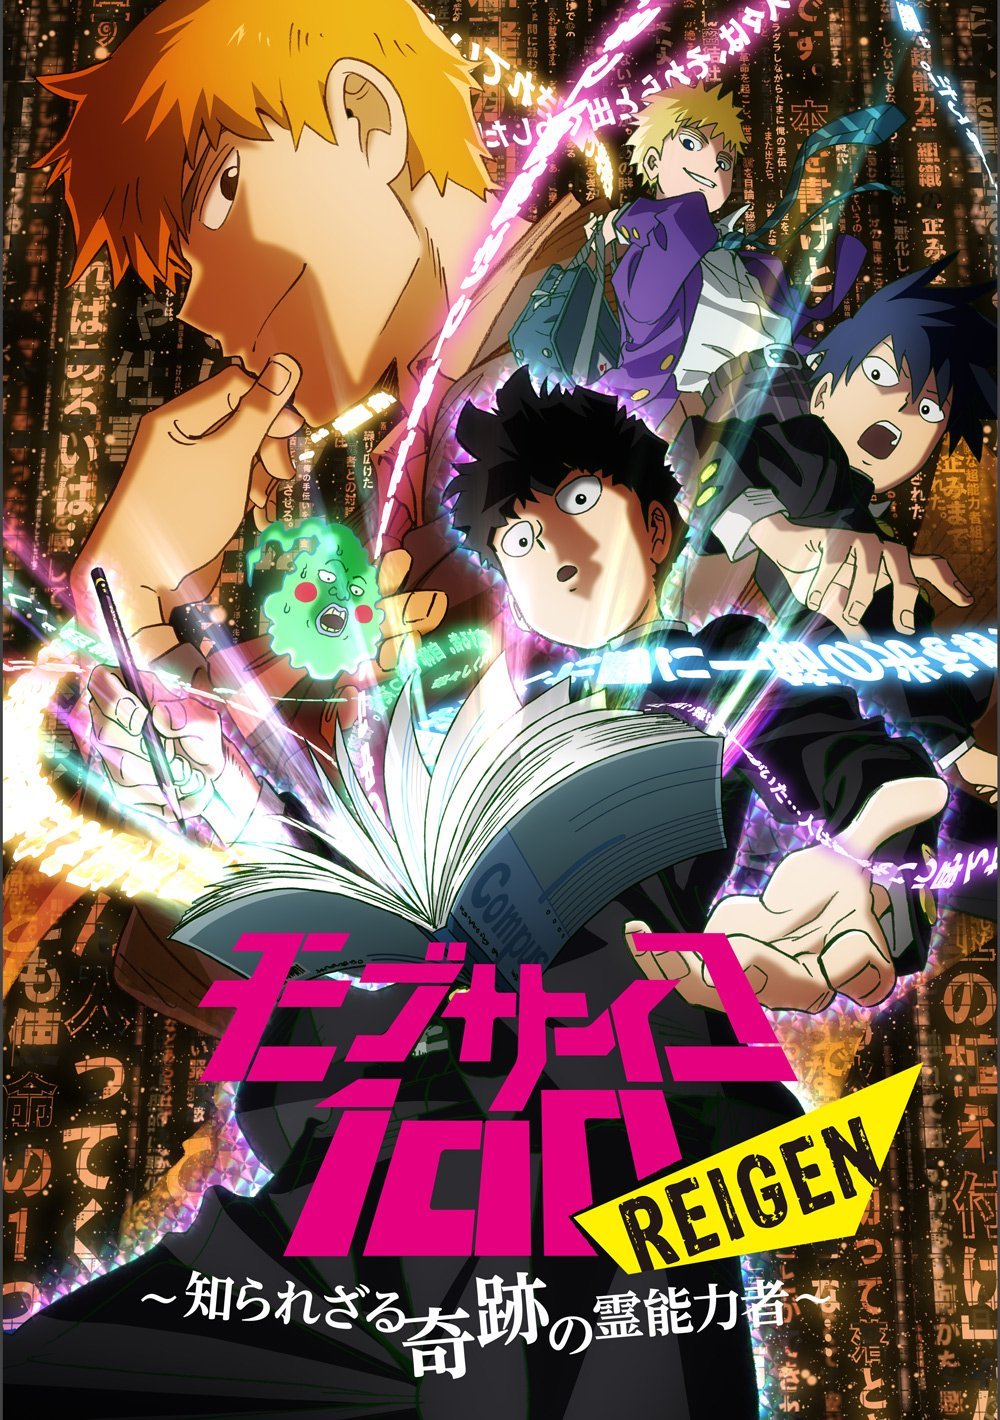 “Mob Psycho 100 Reigen: Shirarezaru Kiseki no Reinouryokusha“ OVA key visual has been revealed. It is a special that summarizes the events of the original TV series with commentary by Reigen Arataka. An event screening is set to take place March...